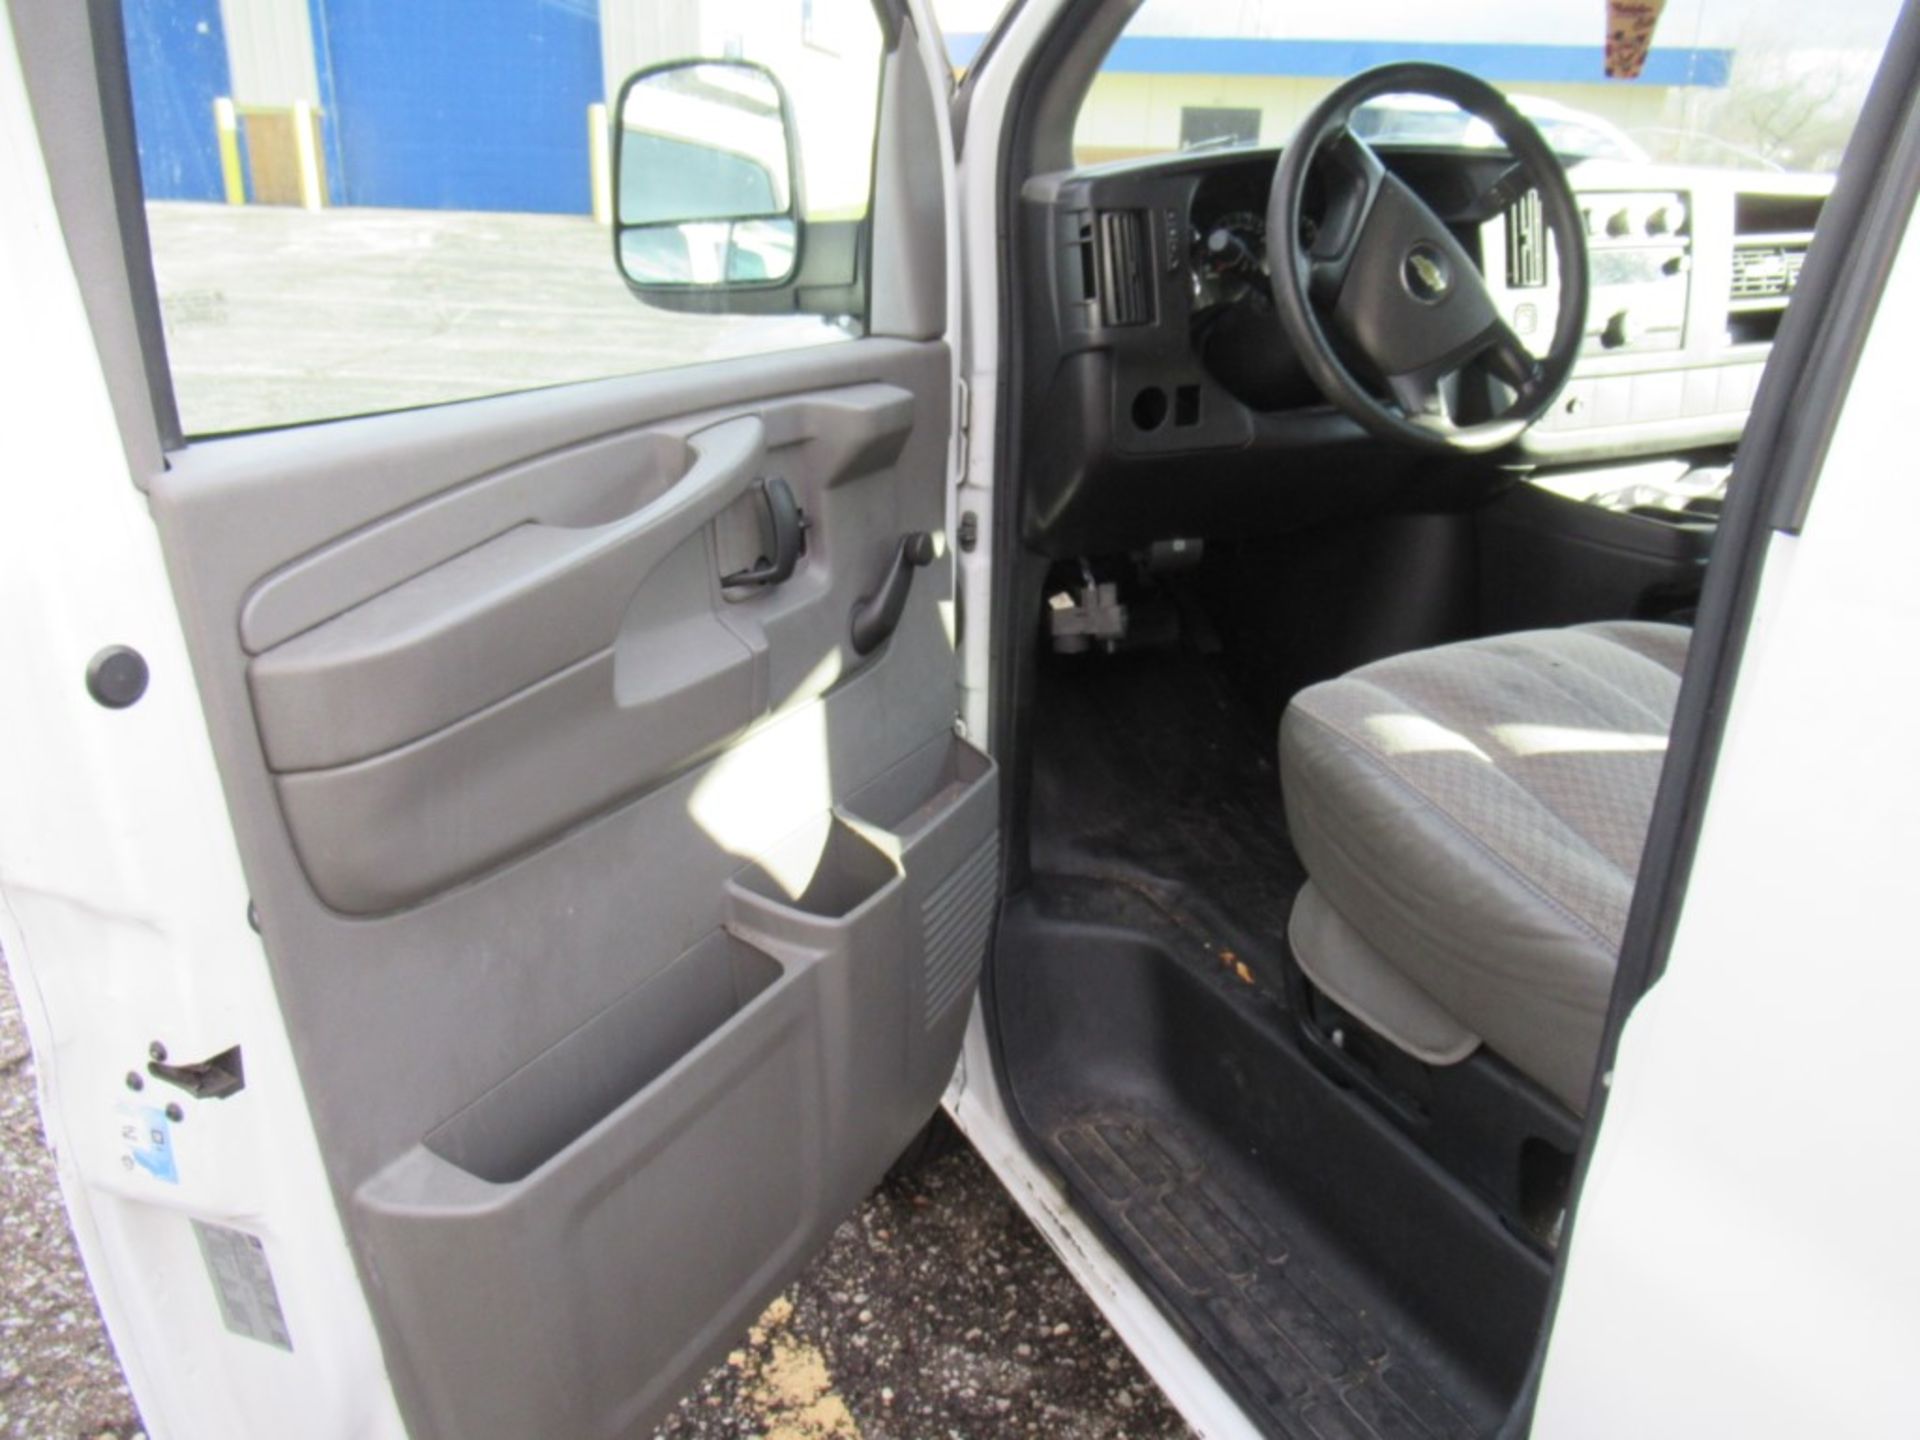 2012 Chevrolet Express Cargo Van, VIN 1GCWGGBA8C1154264, Automatic, AC, AM/FM, Towing, Cracked - Image 19 of 26